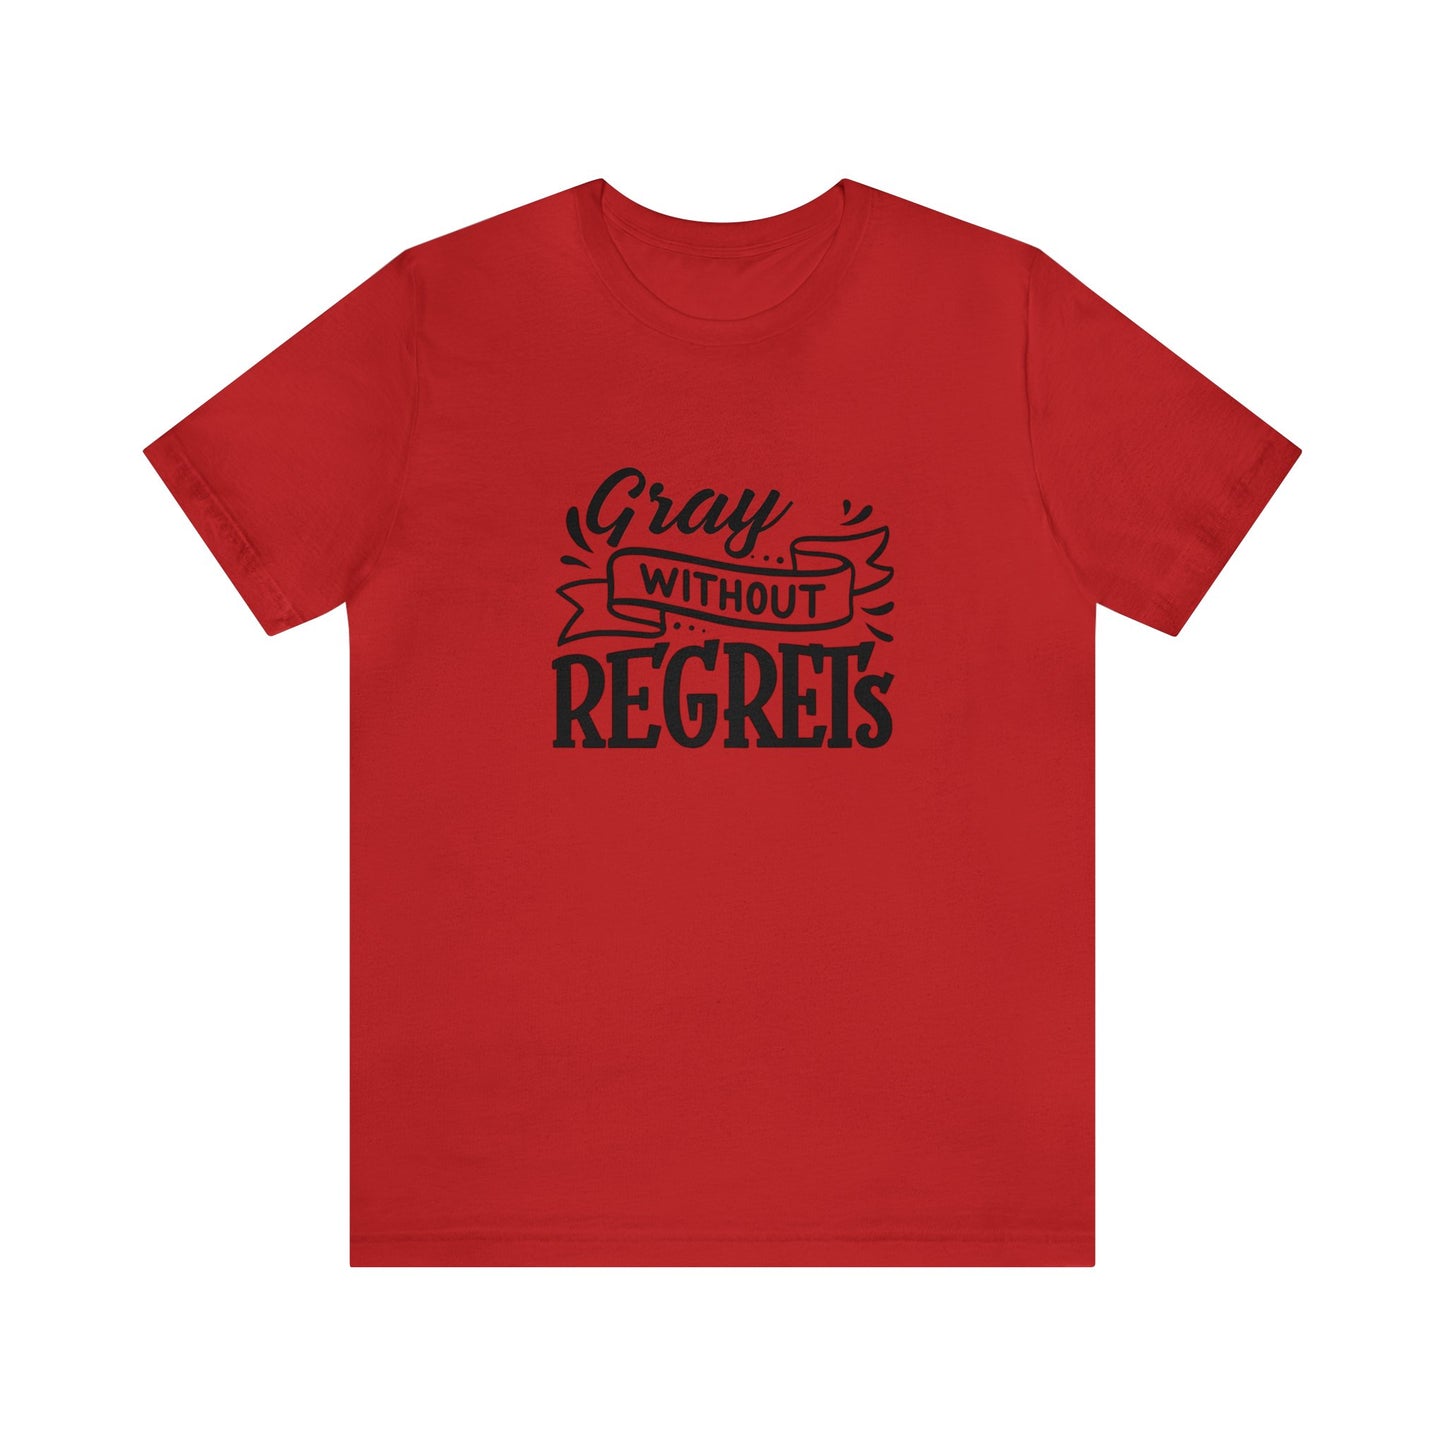 Gray Without Regrets, Unisex Jersey Short Sleeve Tee